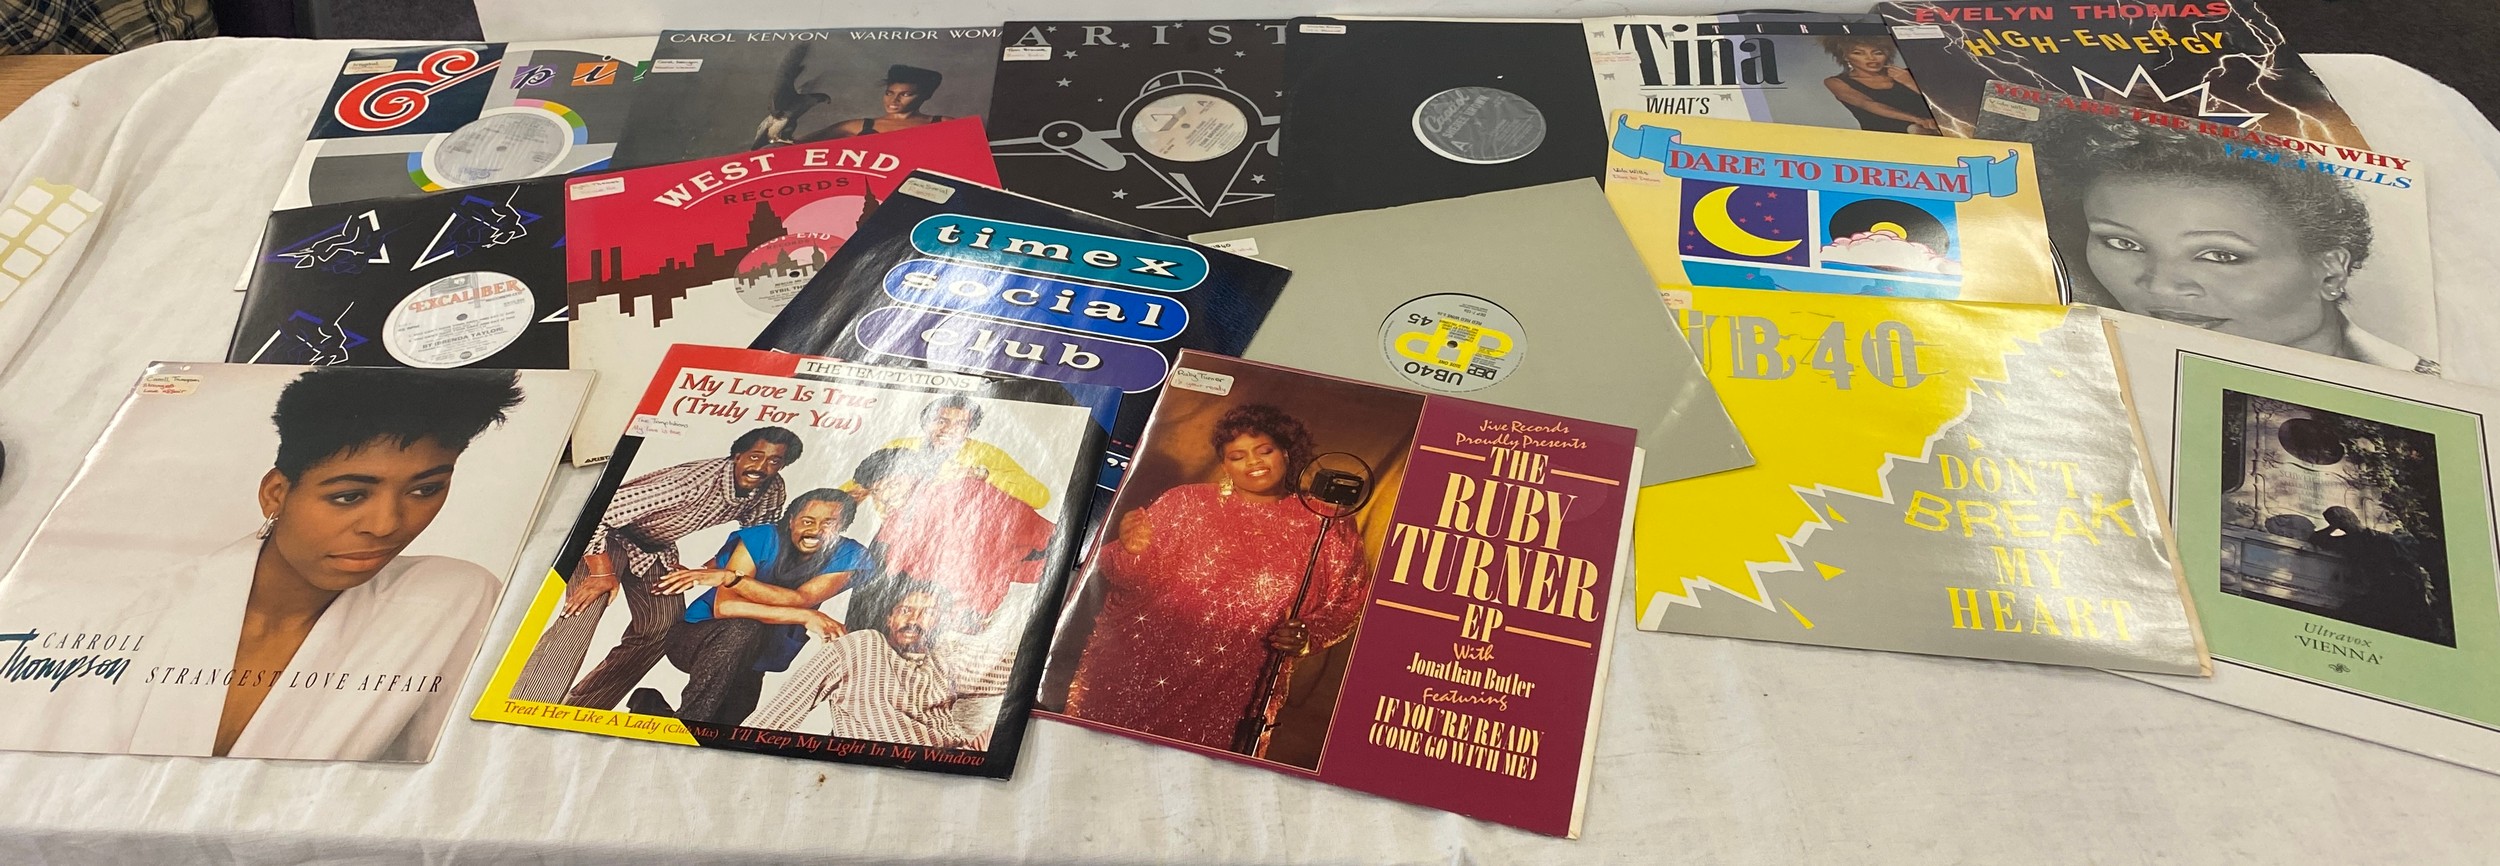 Selection of assorted dance/ R&B 12inch singles includes West End, Tina Turner, UB40, Viola wills